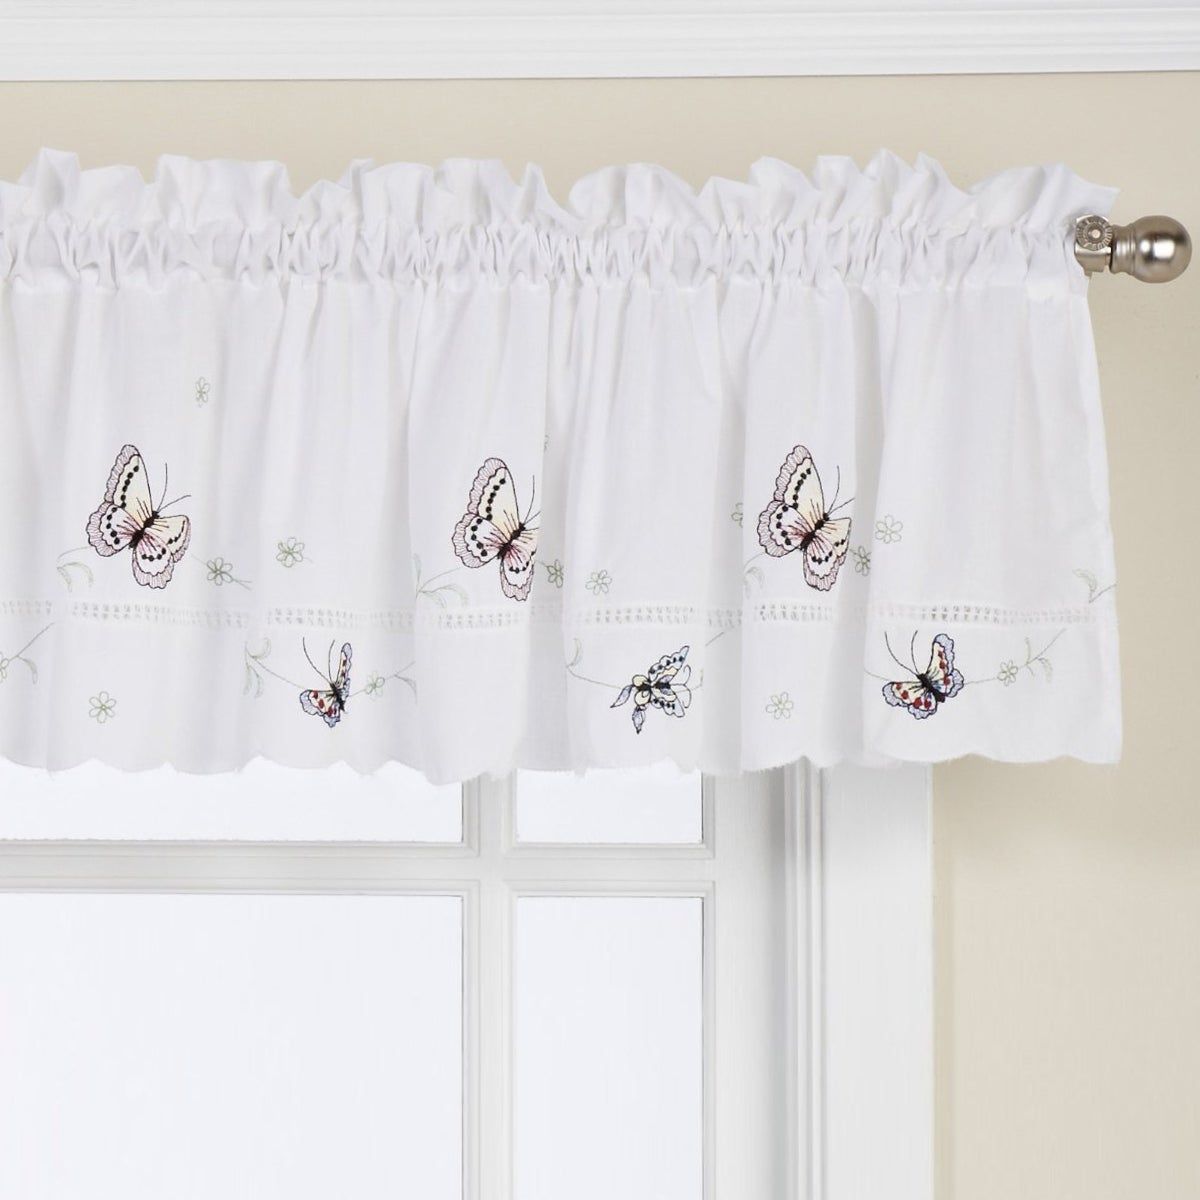 Details About Fluttering Butterfly White Embroidered Tier, Swag, Or White  Valance 56"w X 12"l Within Fluttering Butterfly White Embroidered Tier, Swag, Or Valance Kitchen Curtains (View 1 of 20)